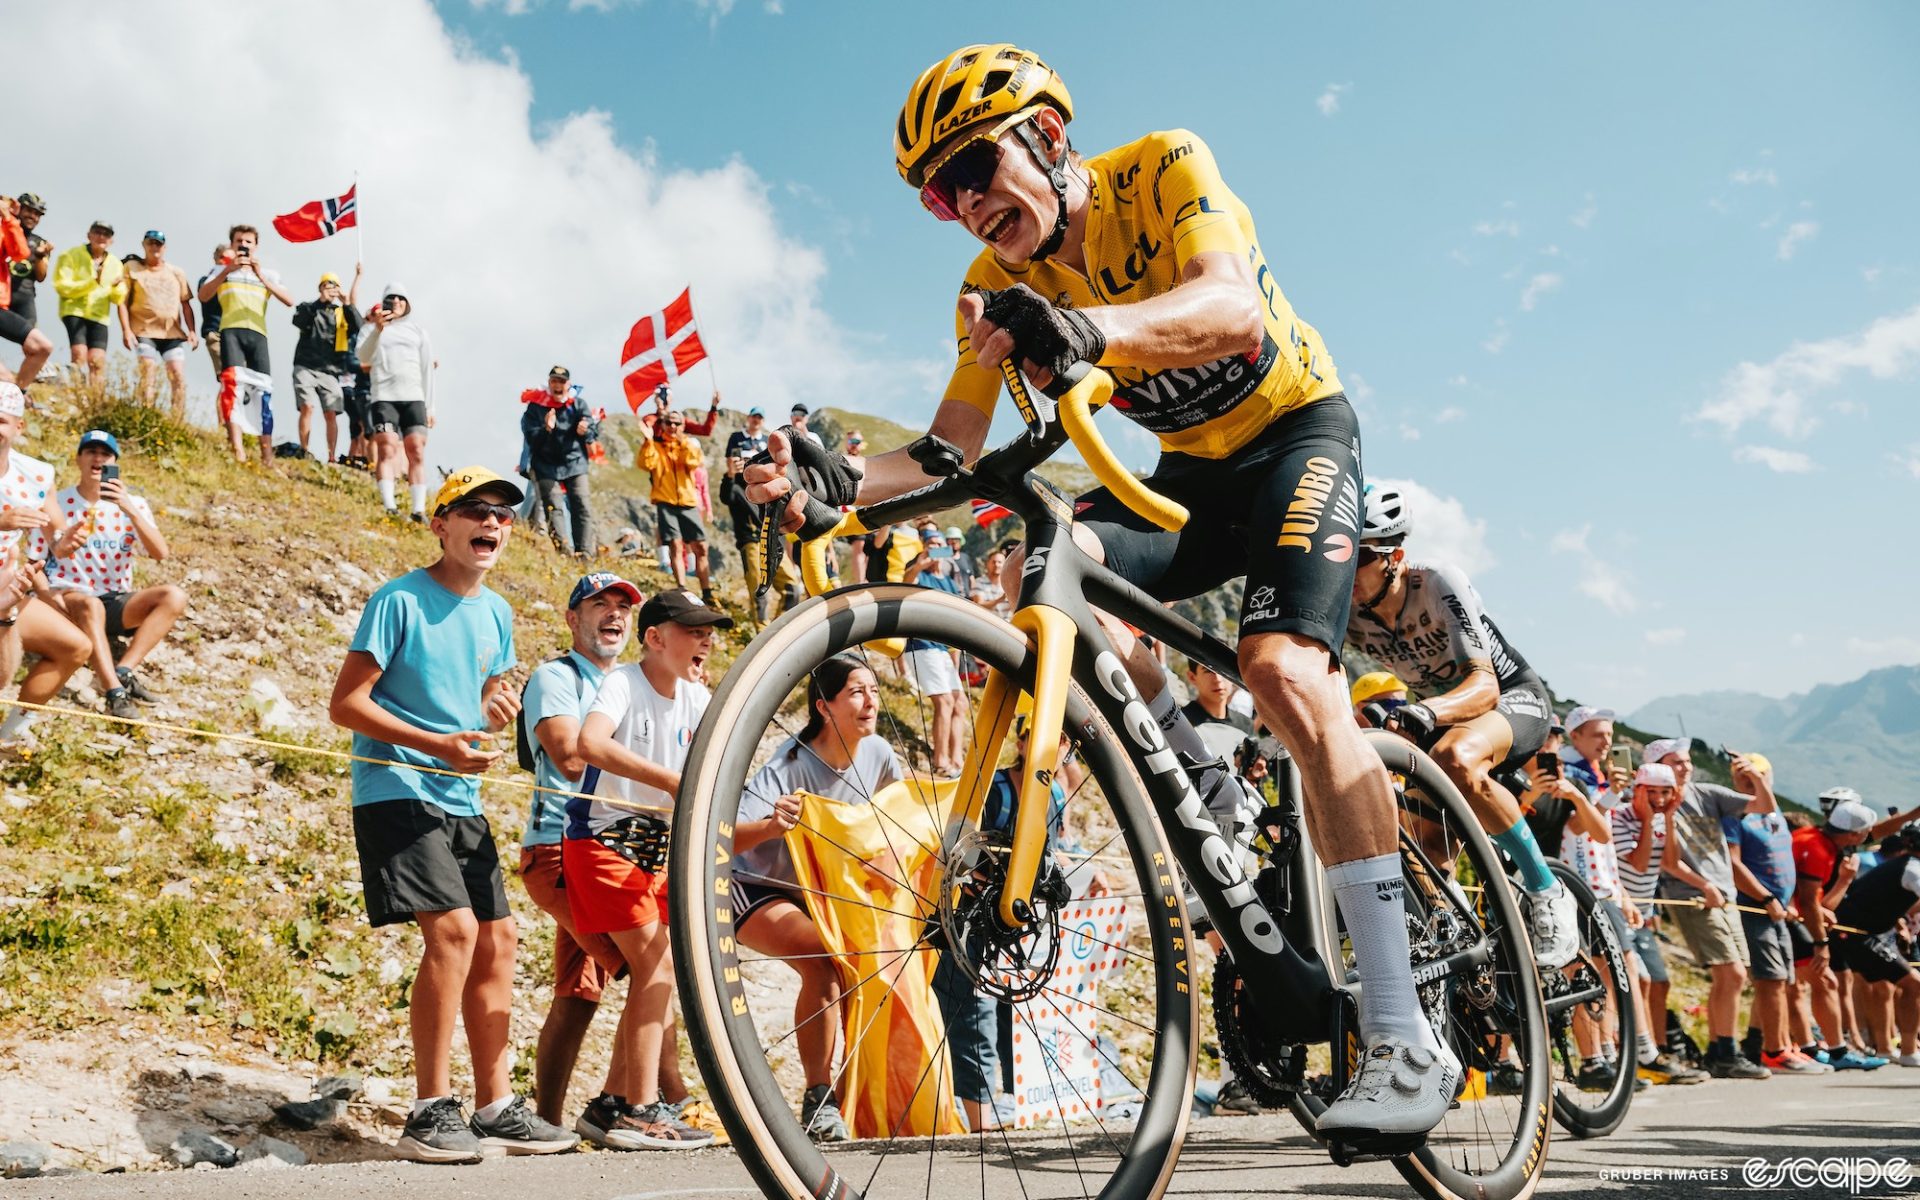 Jonas Vingegaard races on stage 17 of the Tour de France, cheered on by roadside fans while he climbs in the yellow jersey of race leader.